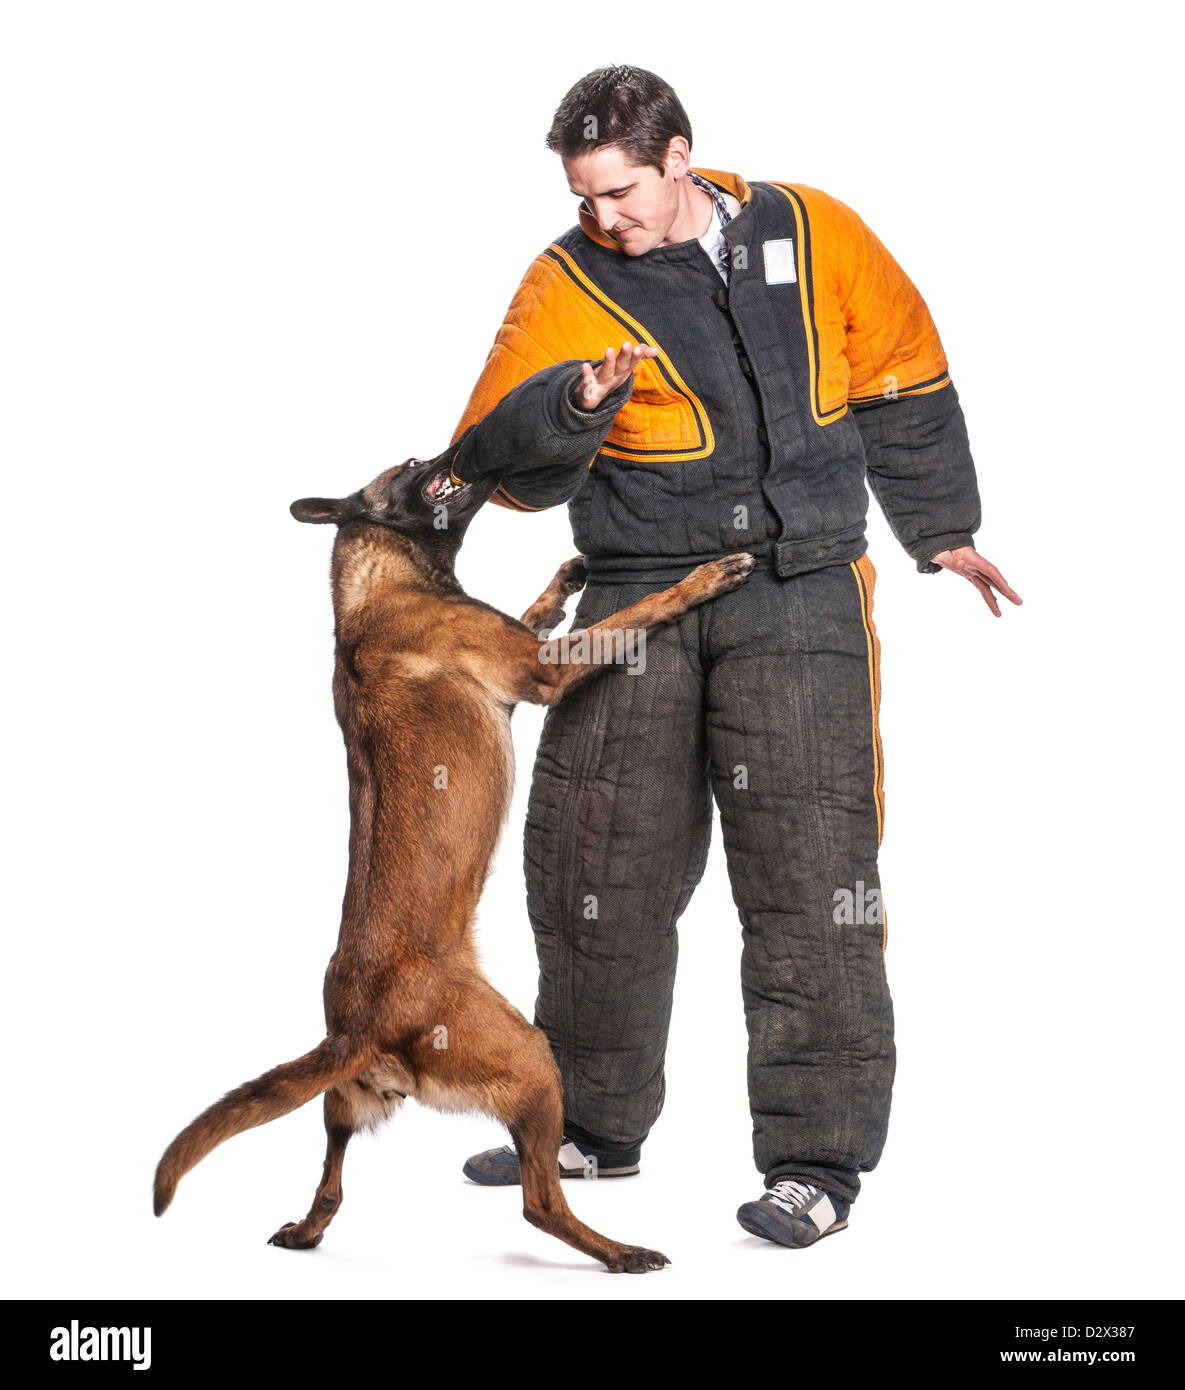 Belgian Shepherd attacking the arm of a trainer wearing a body bite suit against white background Stock Photo